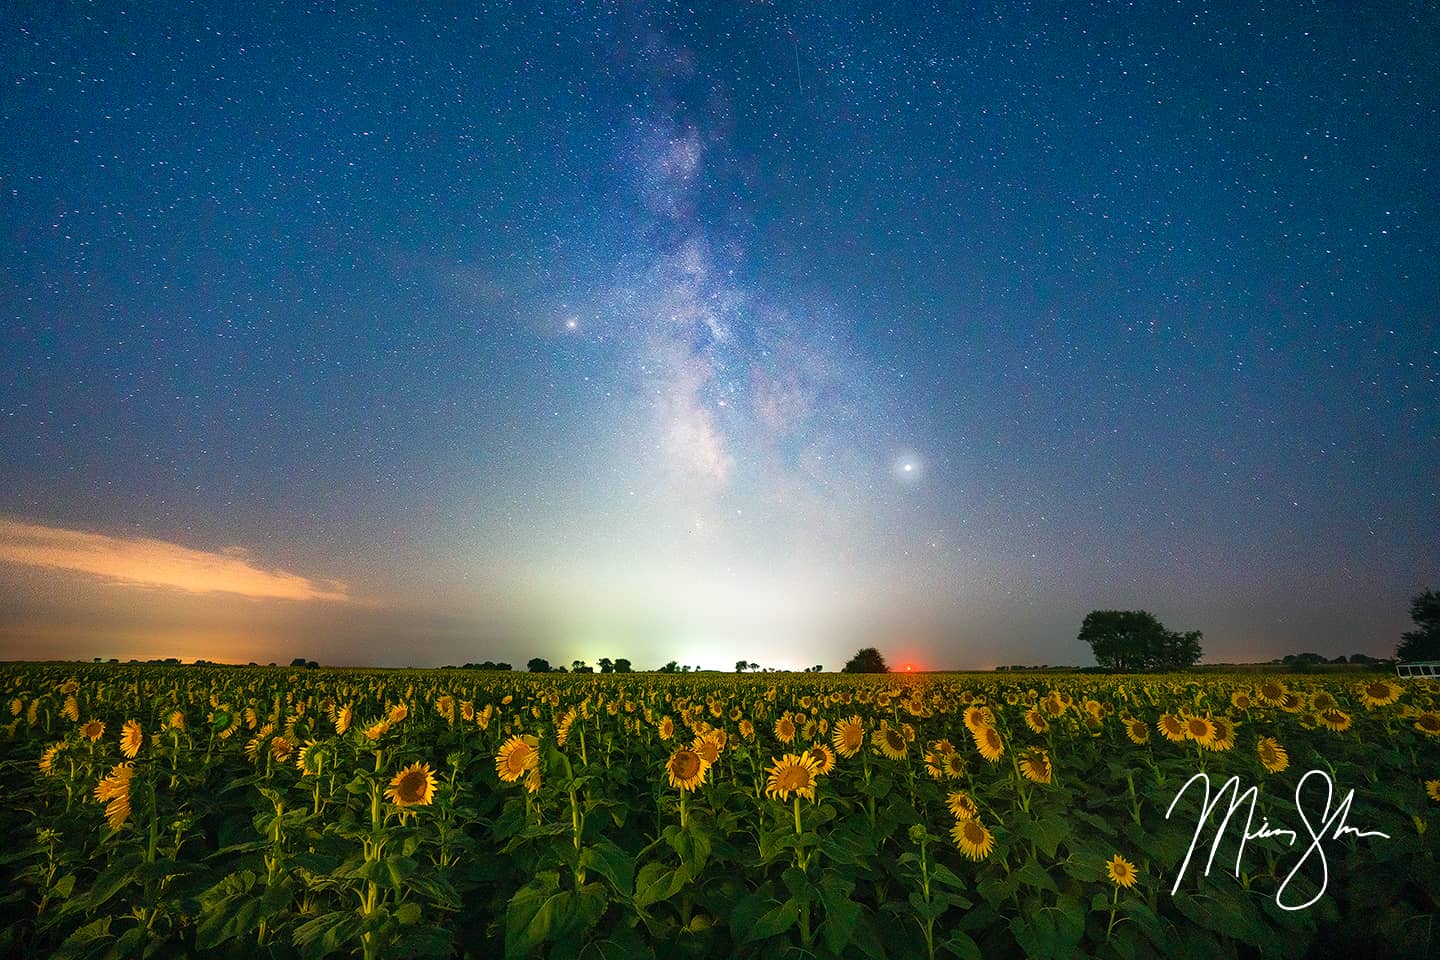 The Milky Way over a sunflower field